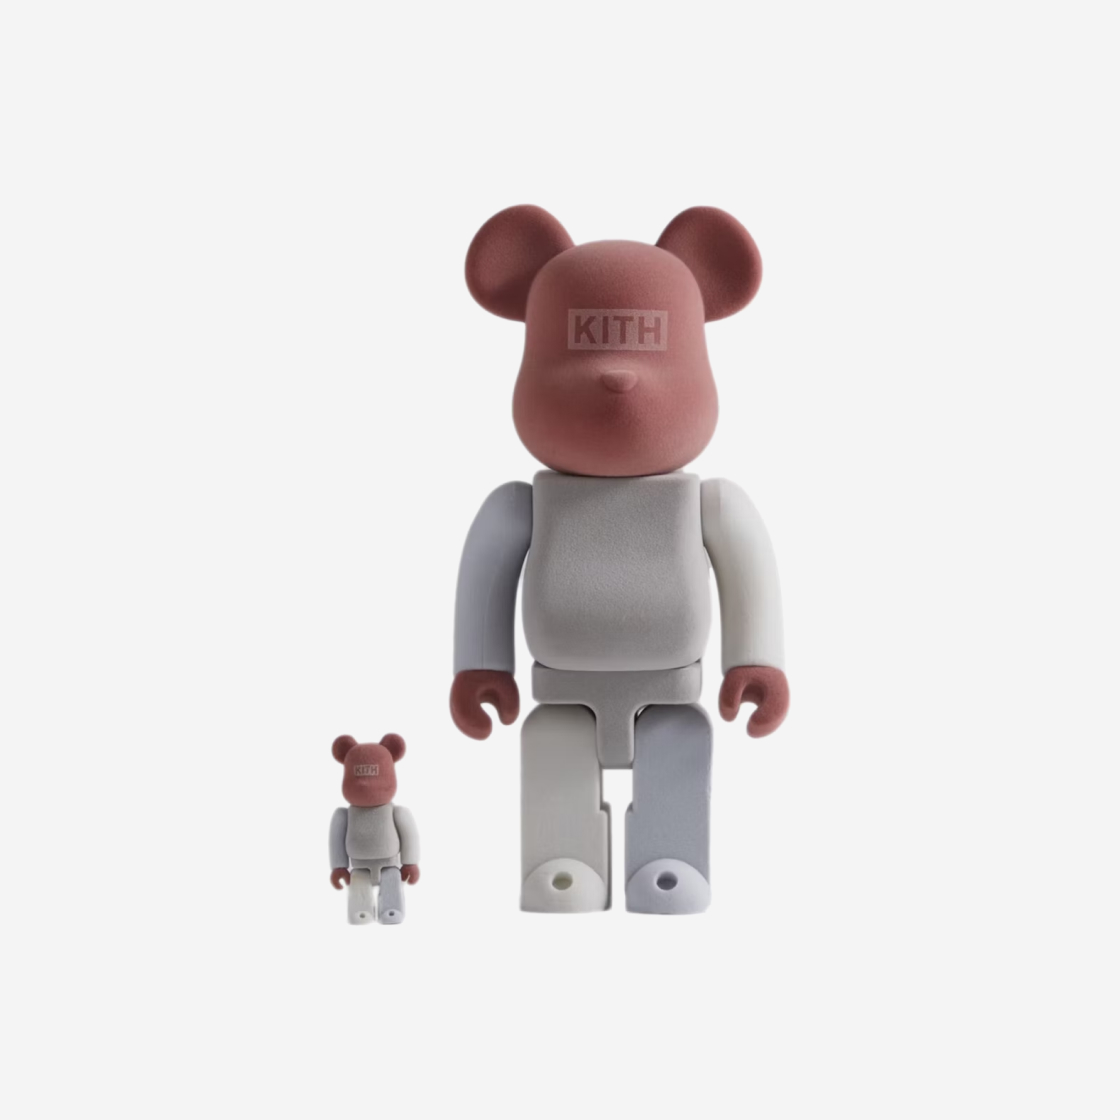 Kith for Bearbrick The Palette 100%&400% - その他